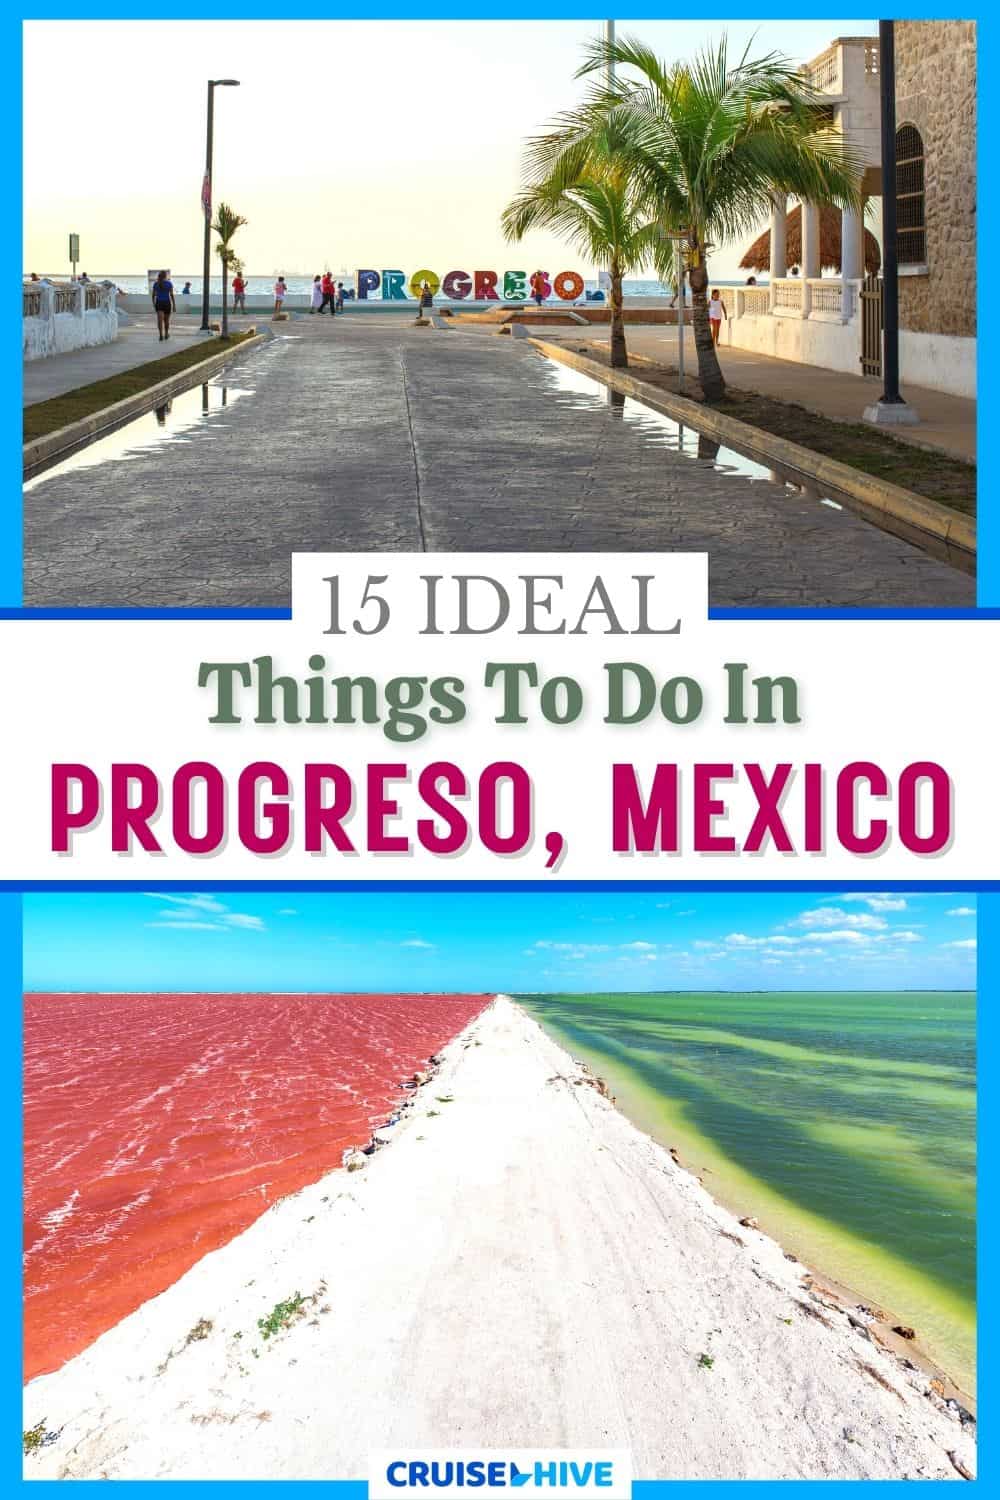 Things to do in Progreso Mexico